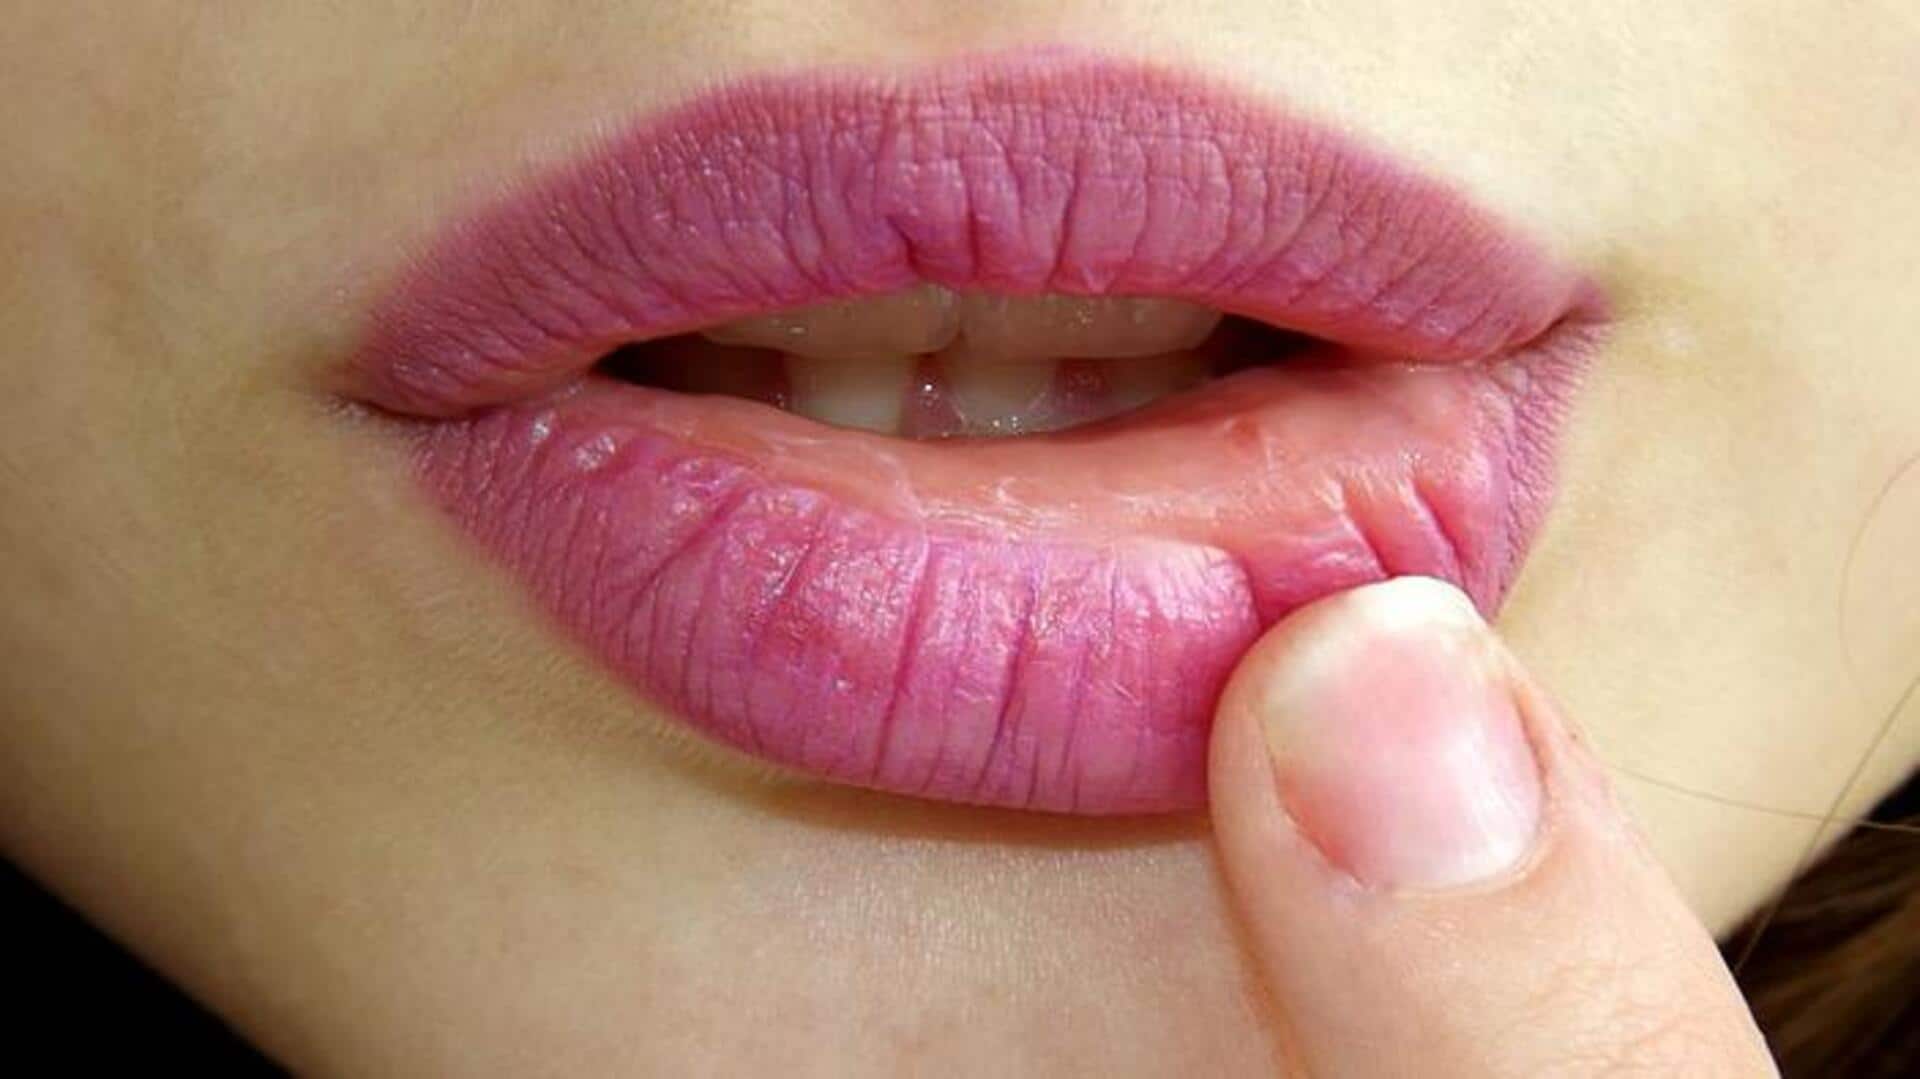 Popsicle-stained lips: Here's how it's done